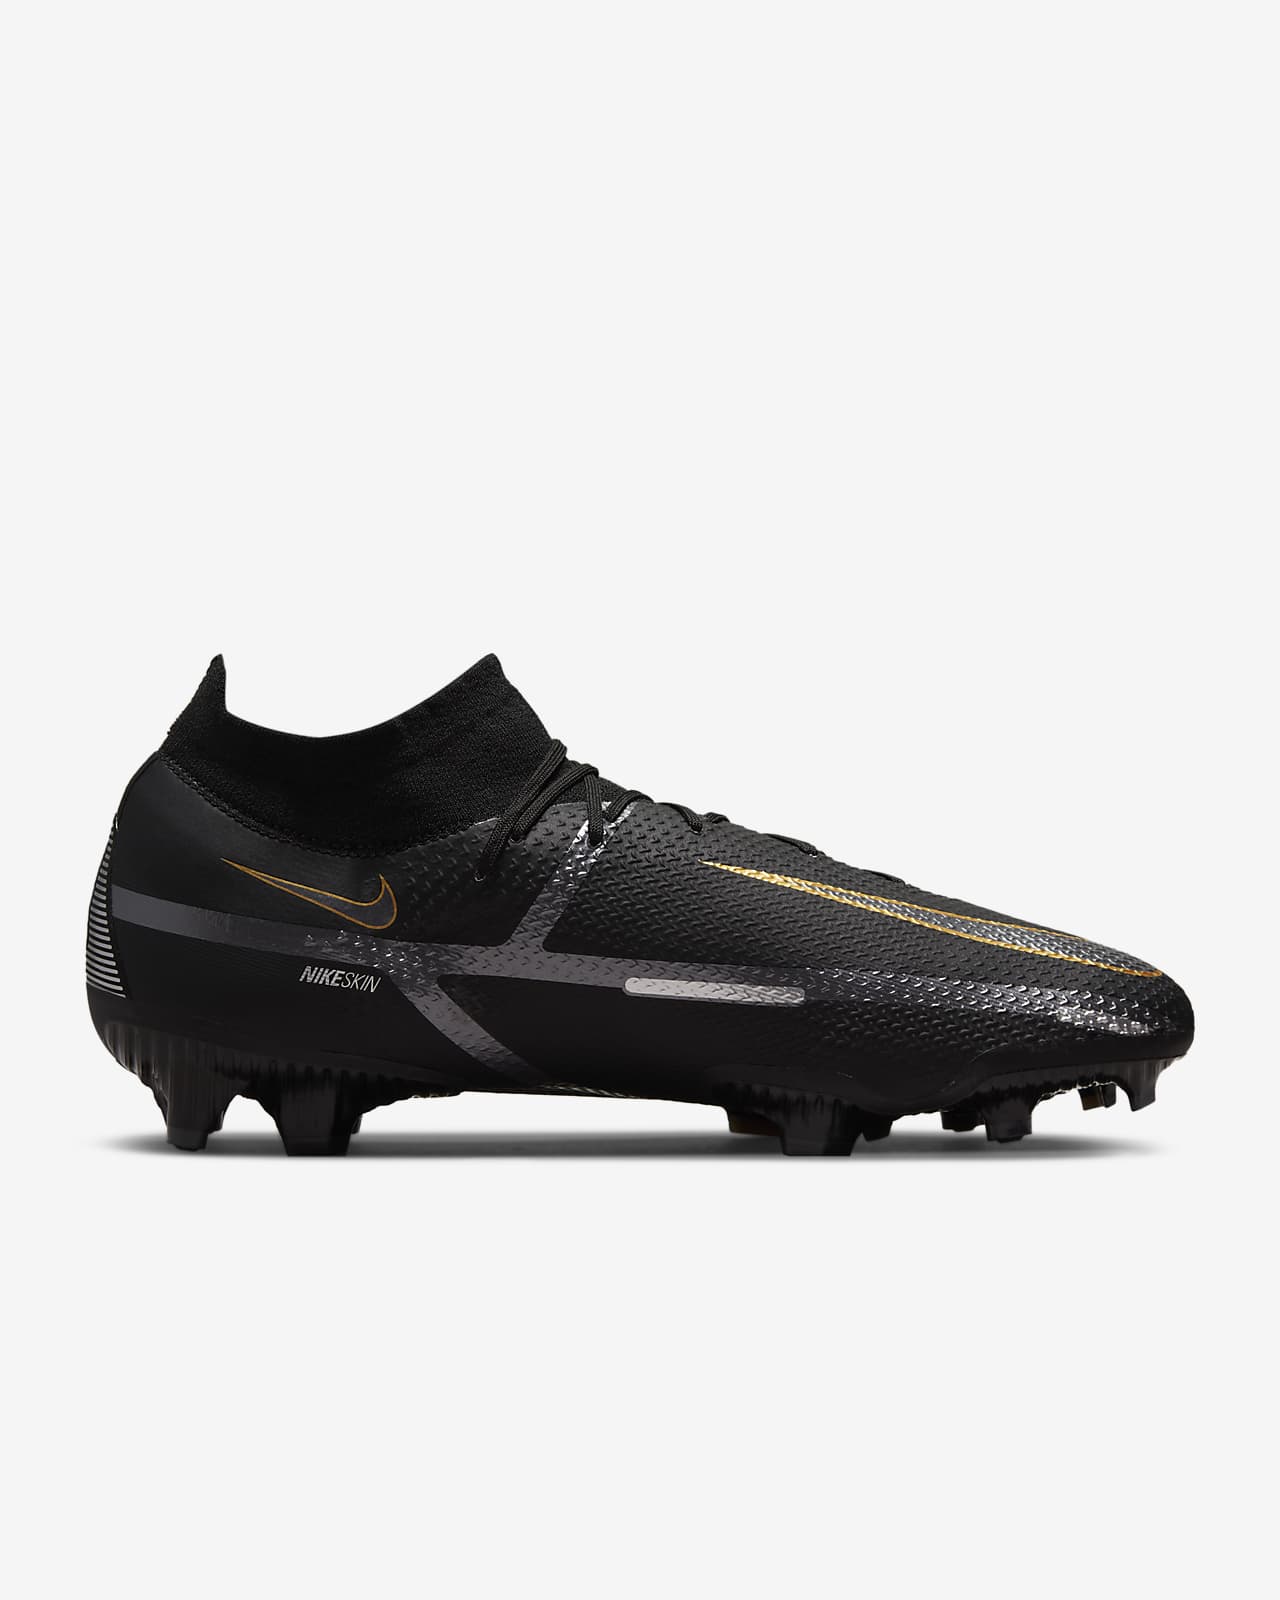 Nike Phantom GT2 Pro Dynamic Fit FG Firm-Ground Soccer Cleat